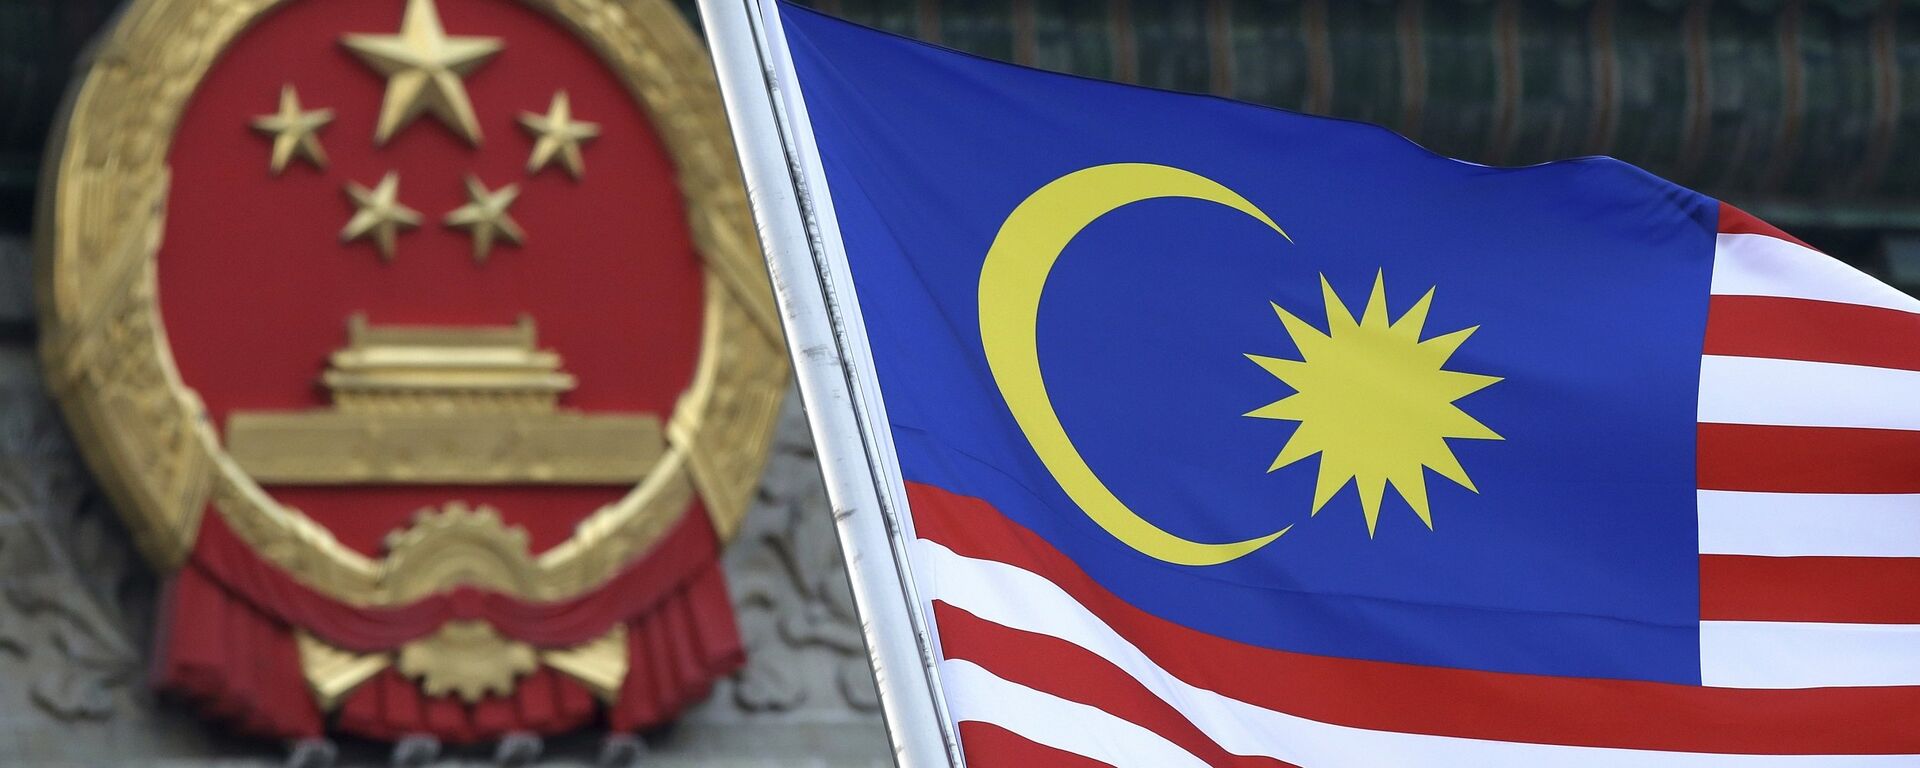 A Malaysia's national flag flutters next to the Chinese national emblem - 俄羅斯衛星通訊社, 1920, 02.06.2021